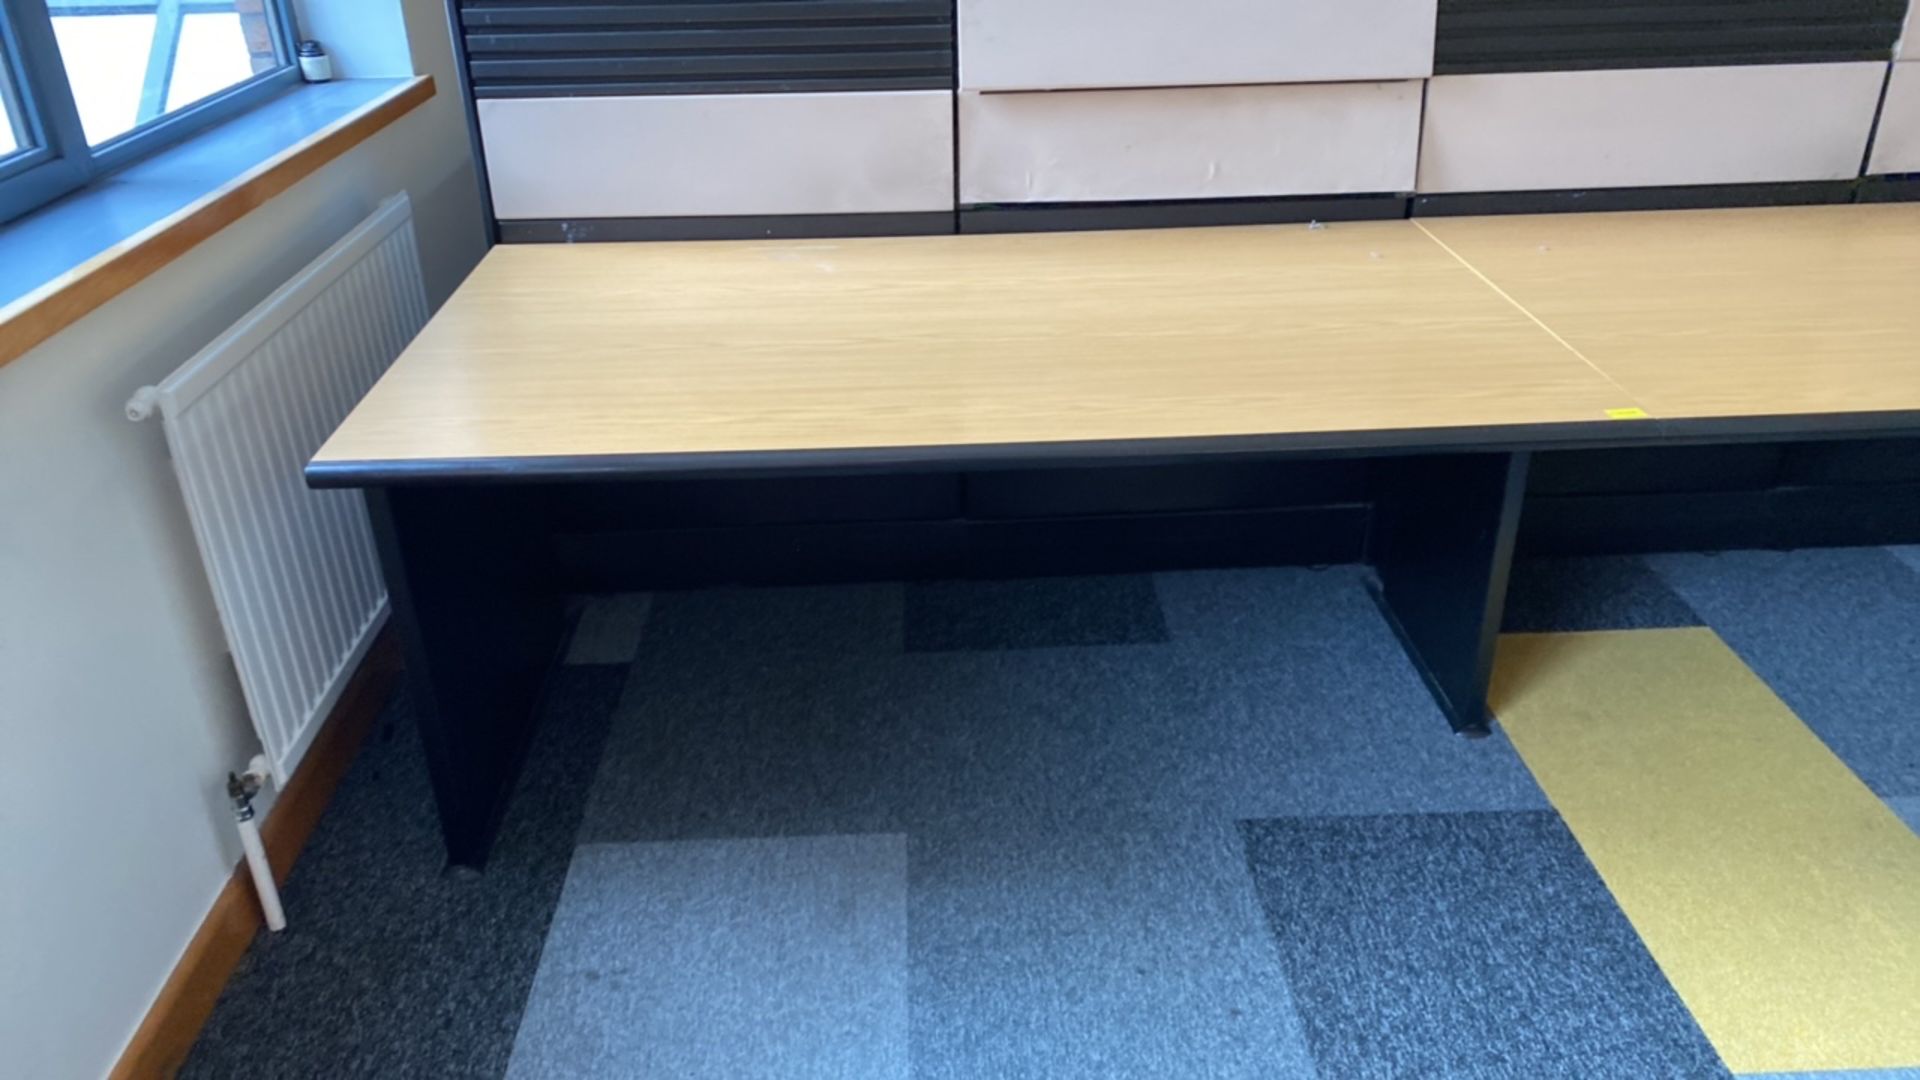 Bank Of 4 Wooden Desks With Black Legs - Image 3 of 6